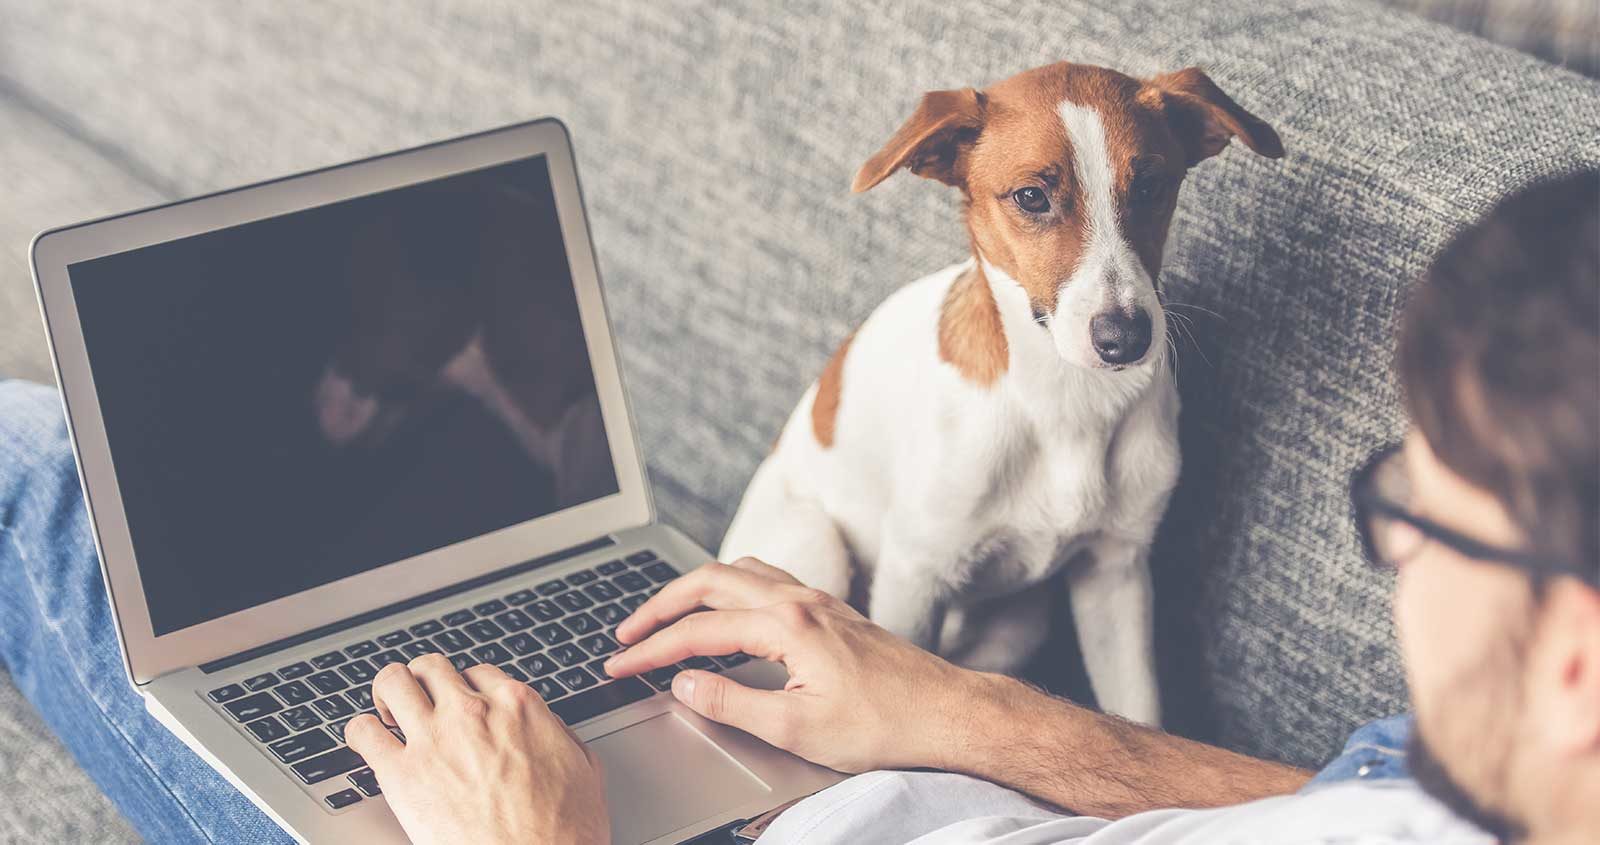 A person typing on a laptop with a dog next to her.